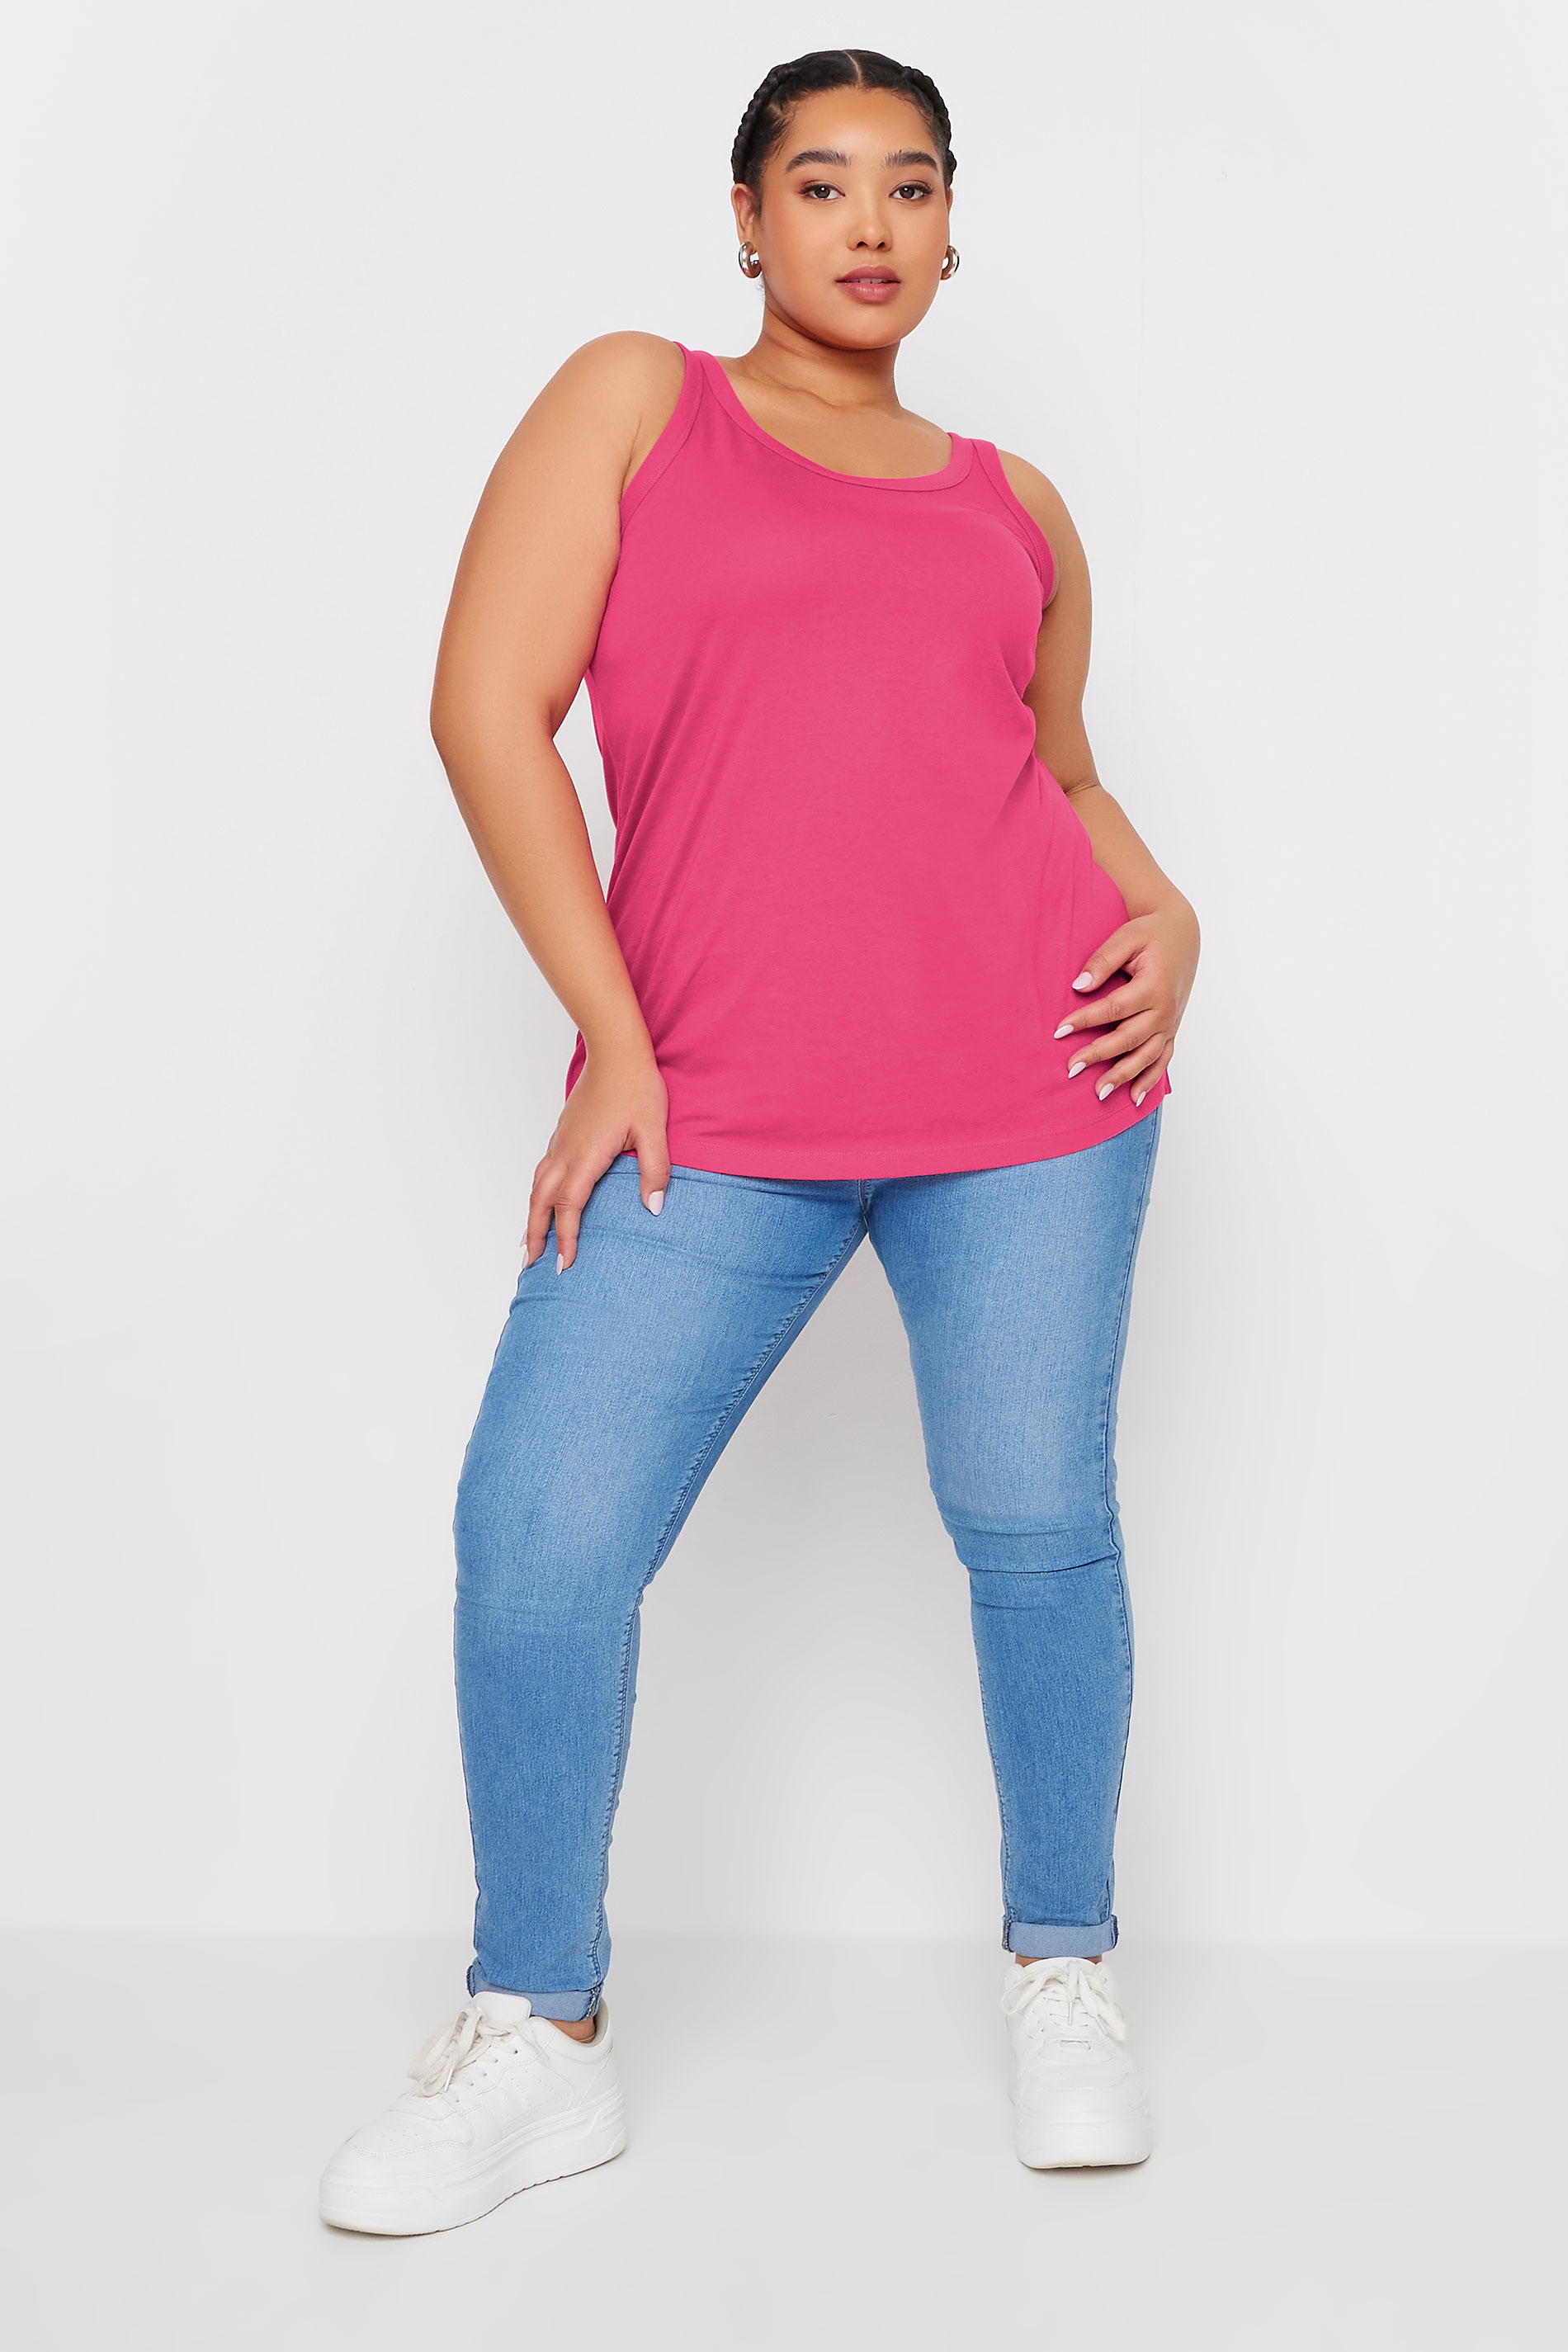 YOURS Plus Size Pink Cotton Blend Vest Top | Yours Clothing 2